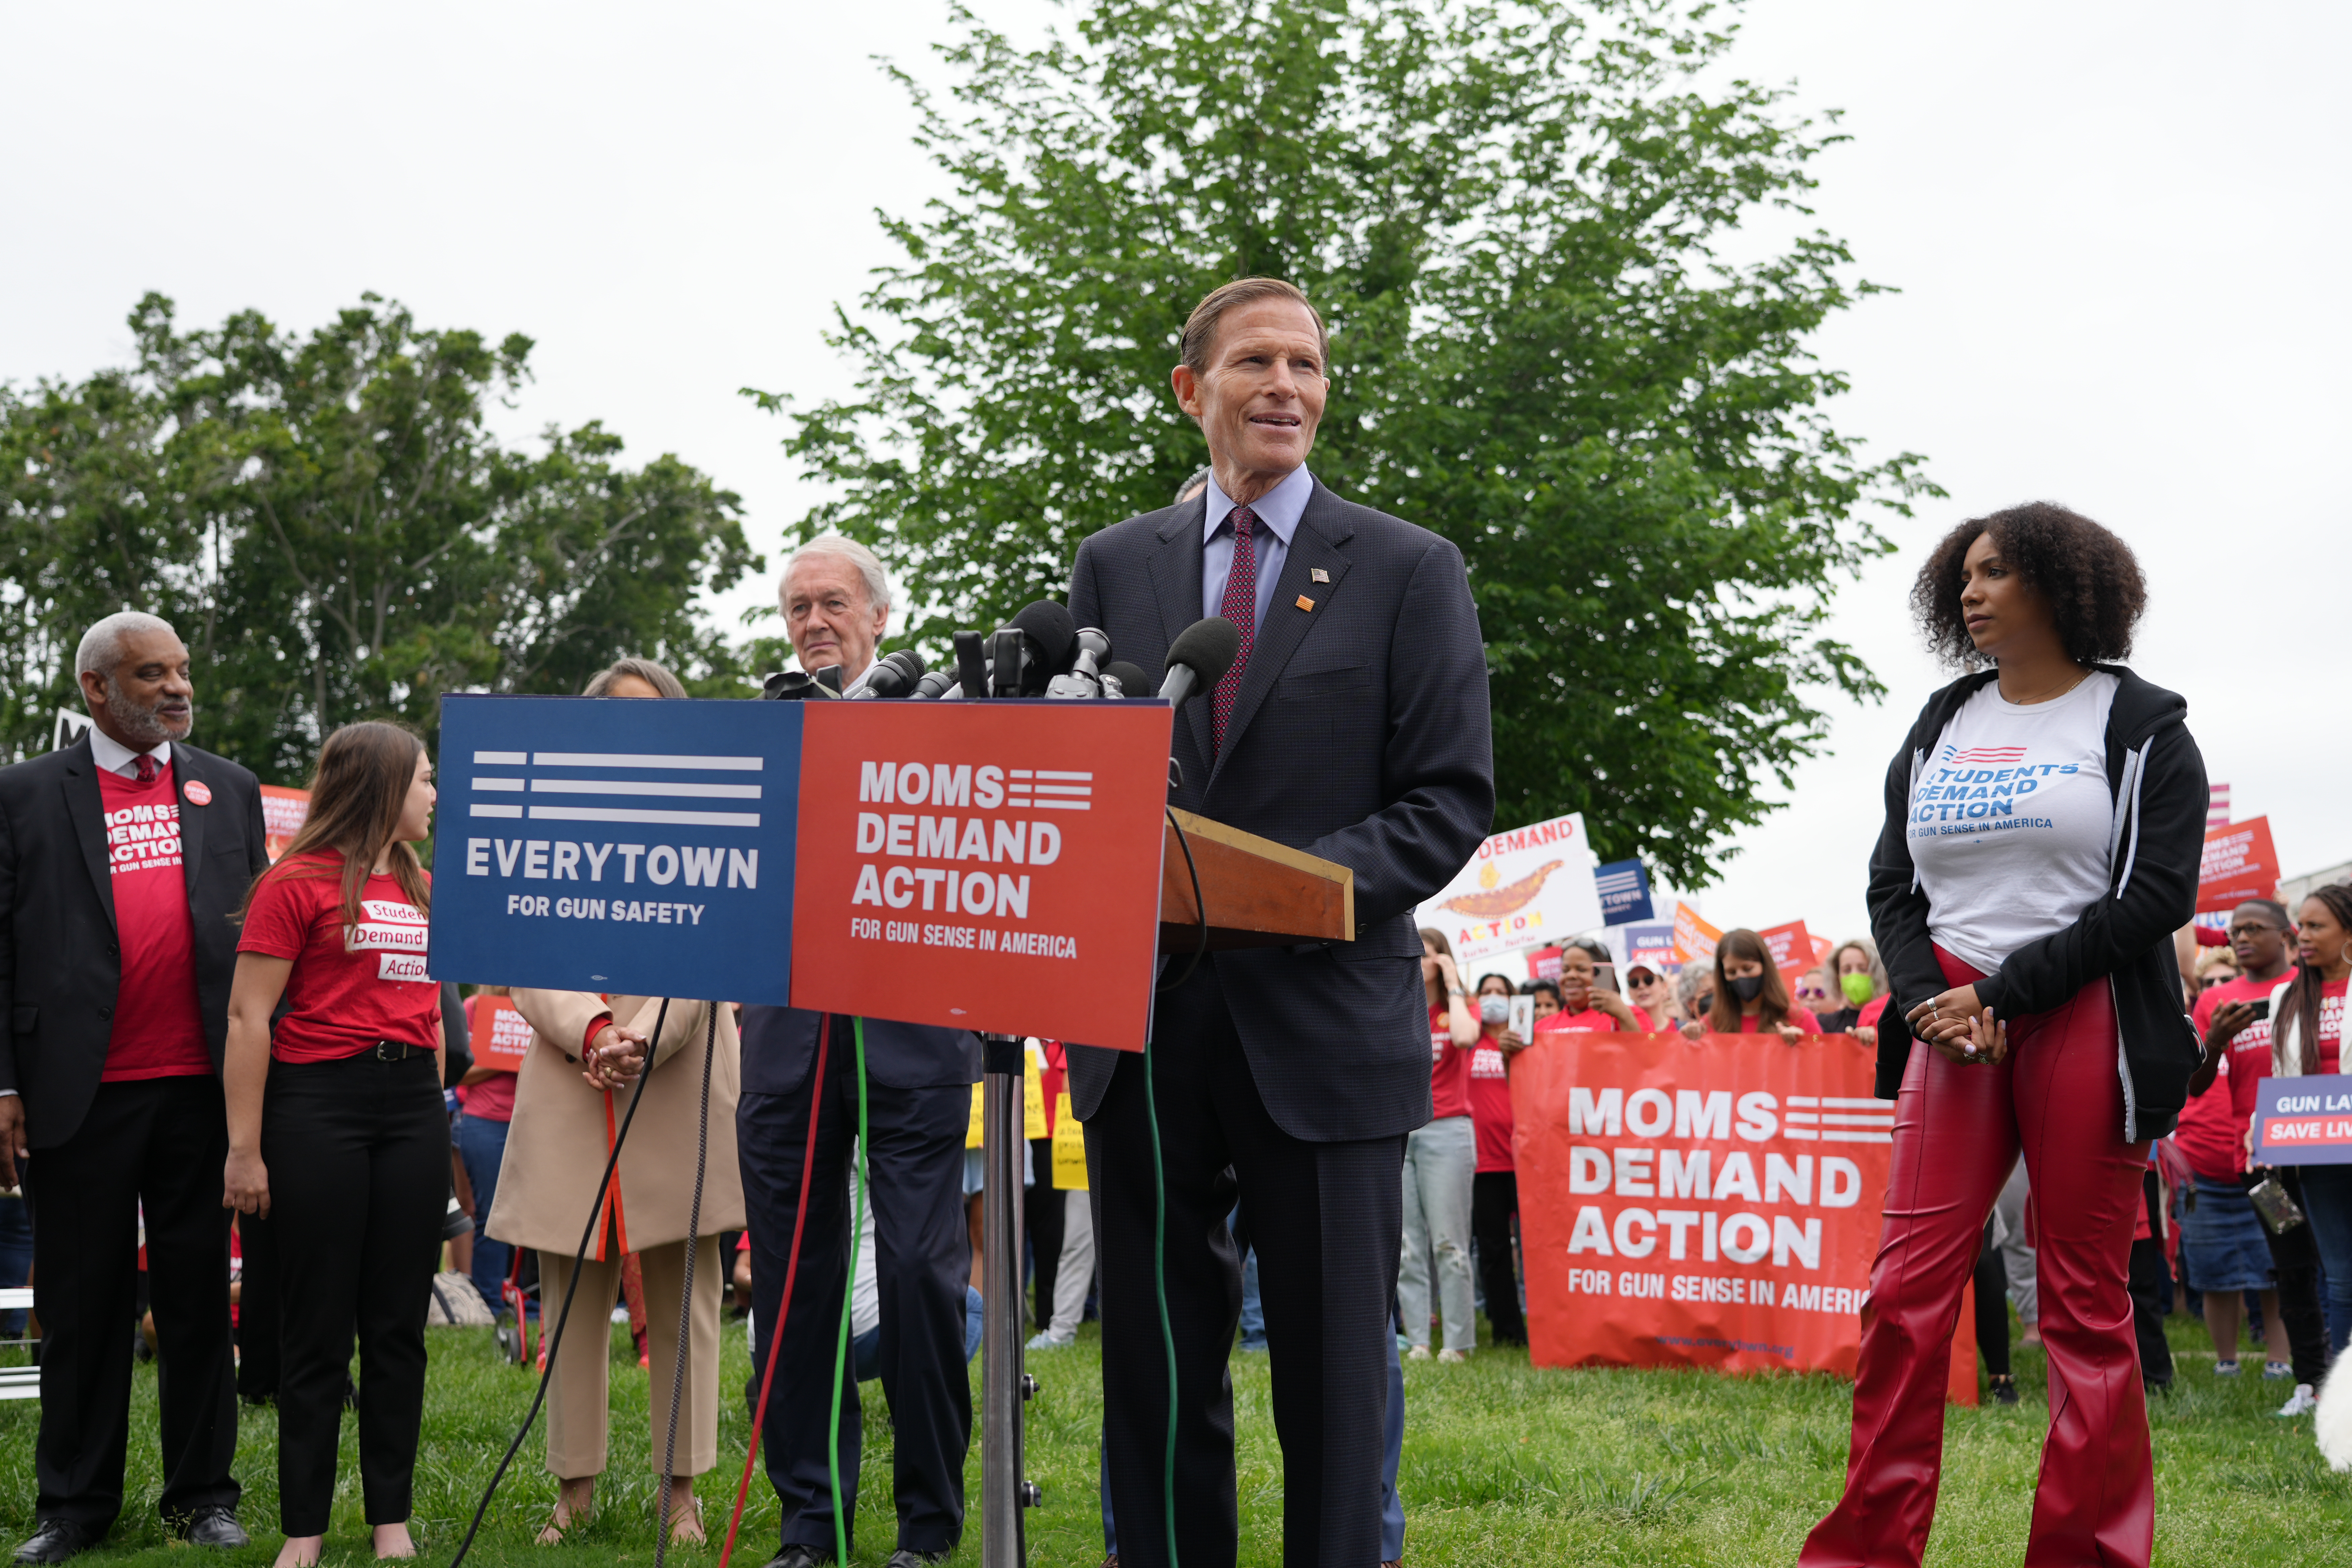 U.S. Senator Richard Blumenthal (D-CT) stood with advocates from Everytown for Gun Safety and Moms Demand Action to demand the Senate pass gun violence prevention legislation after nineteen children and two adults were killed in a shooting at Robb Elementary School in Uvalde, Texas. 